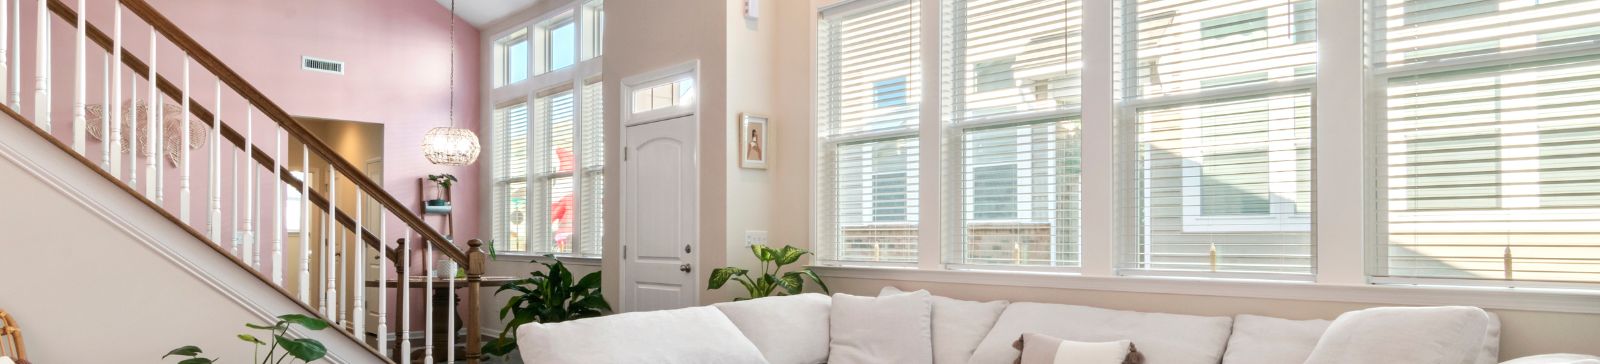 Window shutters and blinds in Maywood